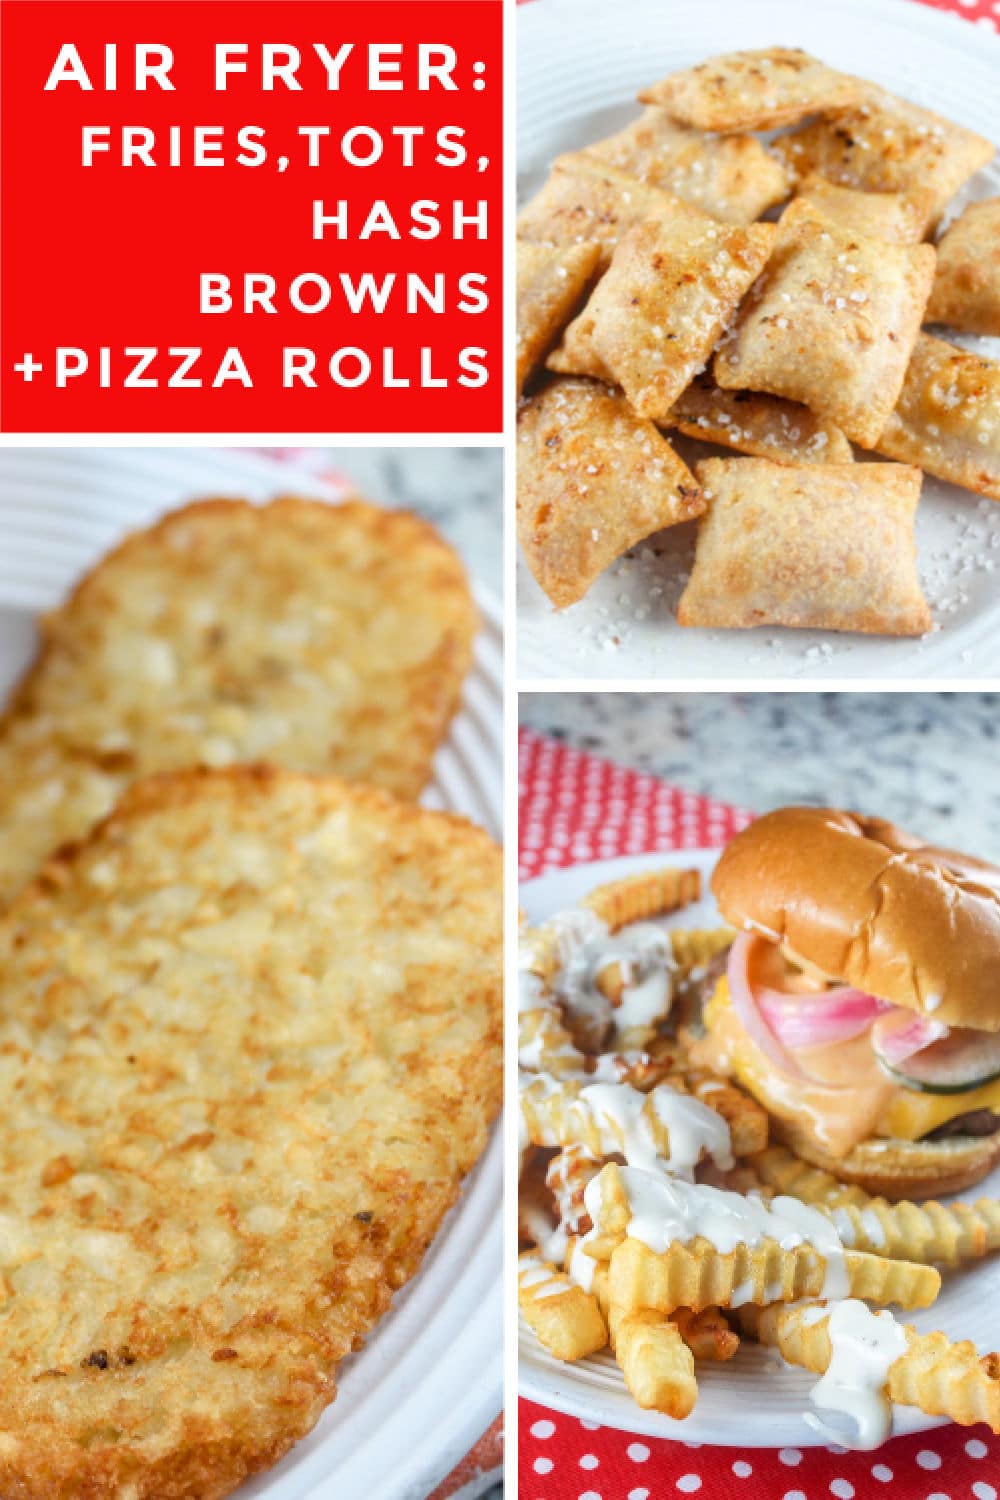 How long do you cook french fries in the air fryer? What about tater tots? Hashbrowns in the air fryer? And what about - PIZZA ROLLS?!!!! via @foodhussy